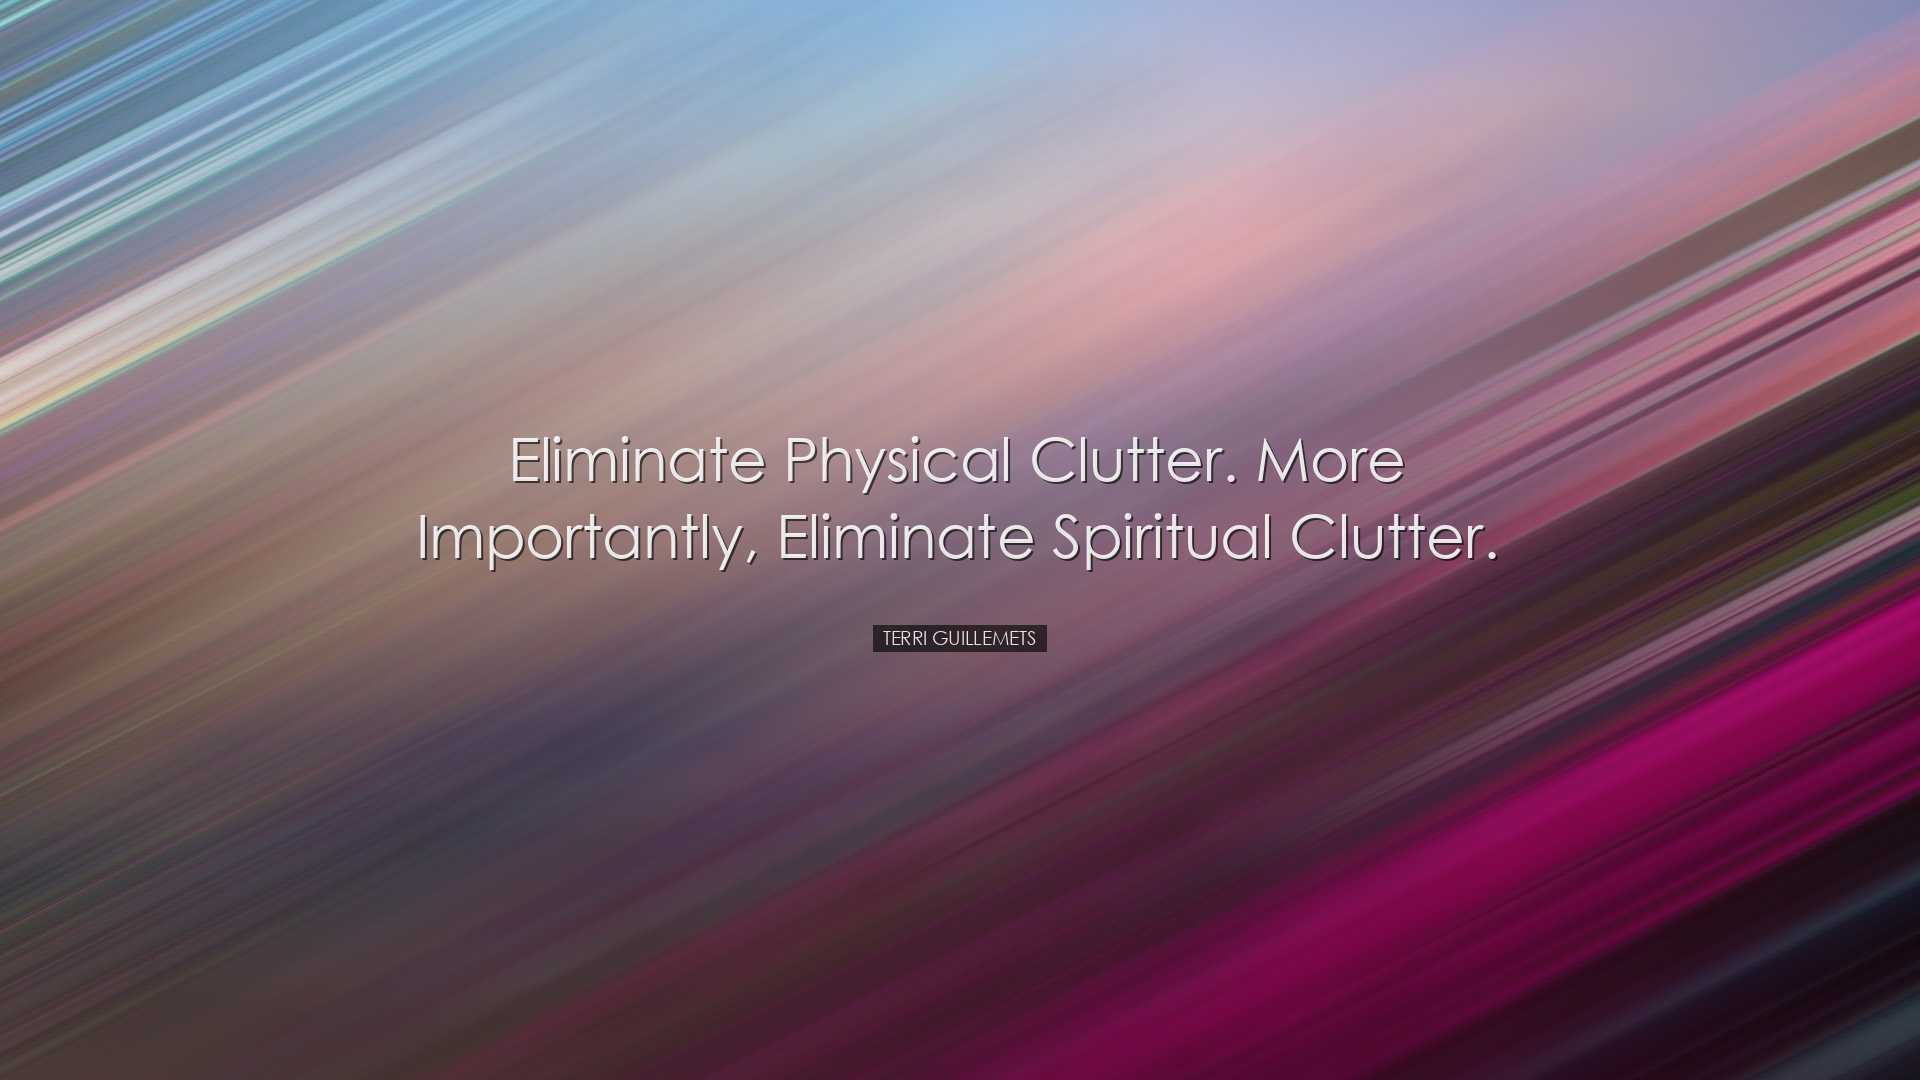 Eliminate physical clutter. More importantly, eliminate spiritual